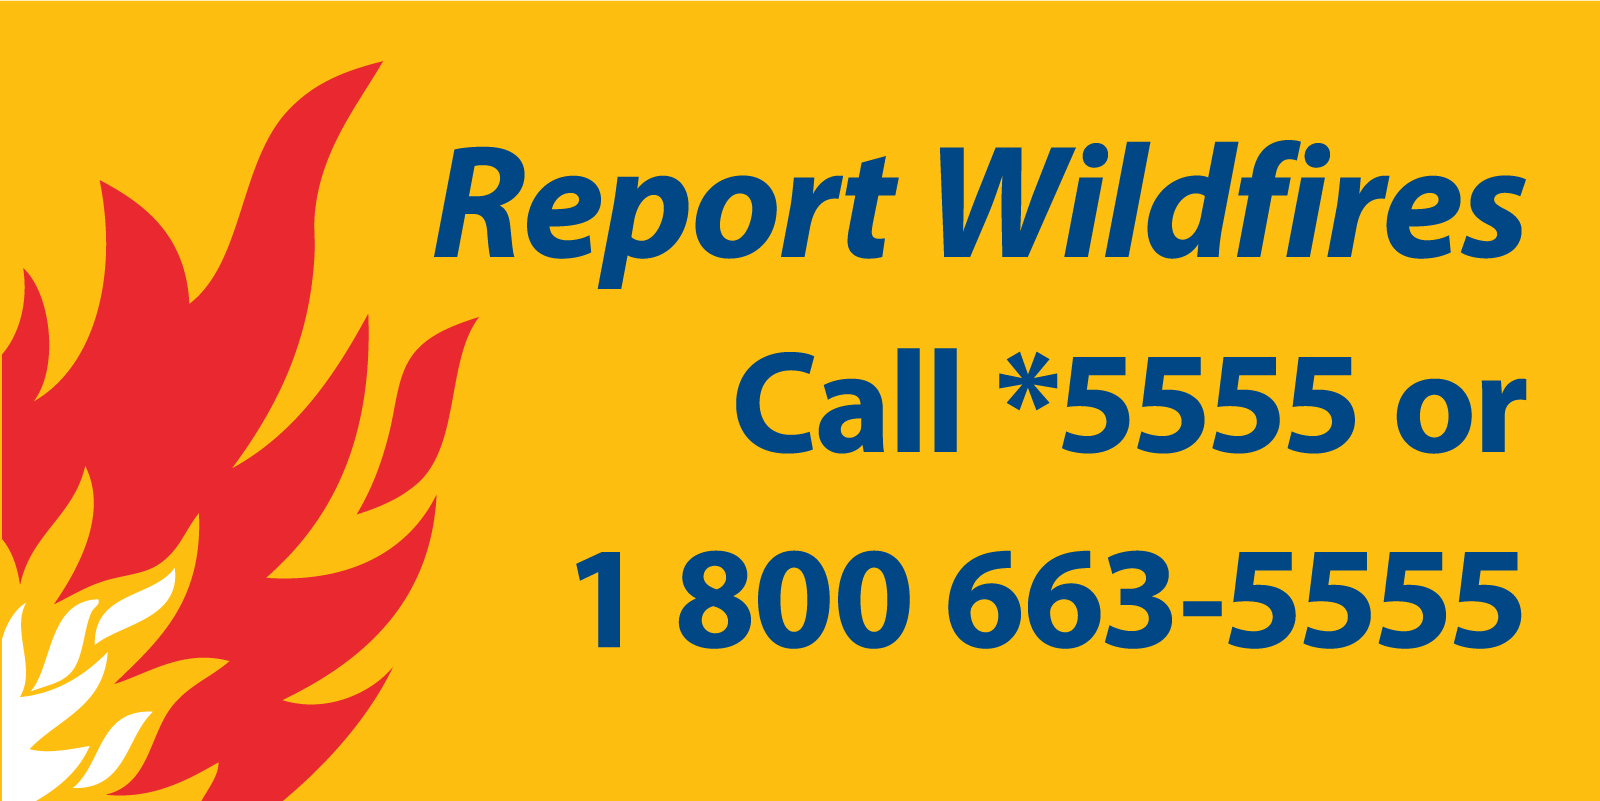 red flame on yellow background with text saying "report wildfires call star 5555 or 1 800 663-5555